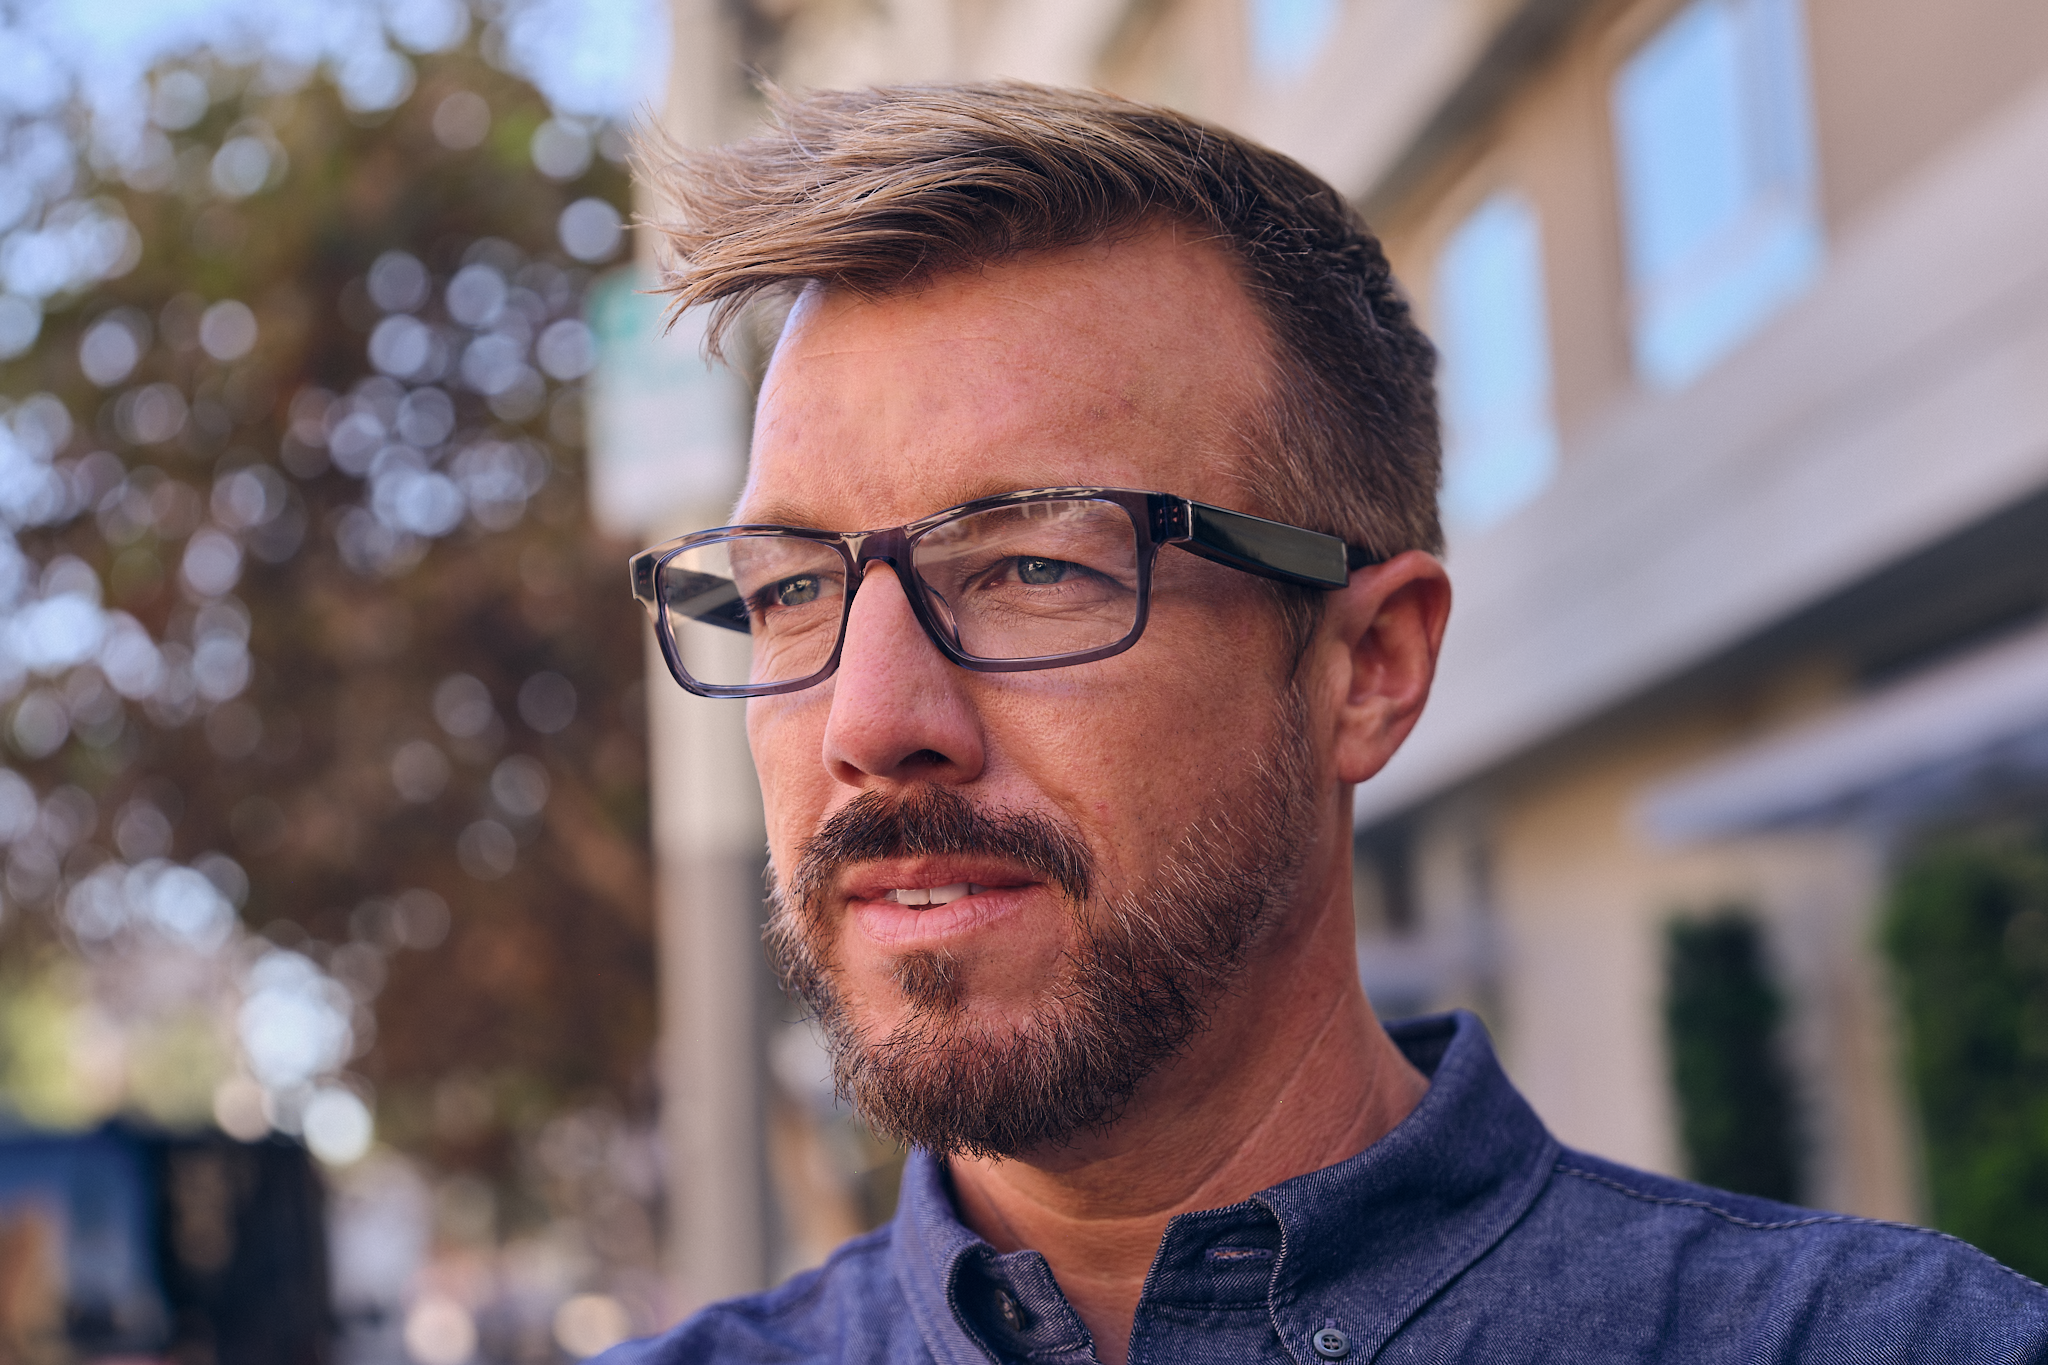 Amazon product lifestyle photography of a man wearing Amazon Echo Frames. The black frames look mostly like regular prescription glasses but have very thick arms. He is middle-aged and has a beard and stylish hair. Outdoors with a blurred background.